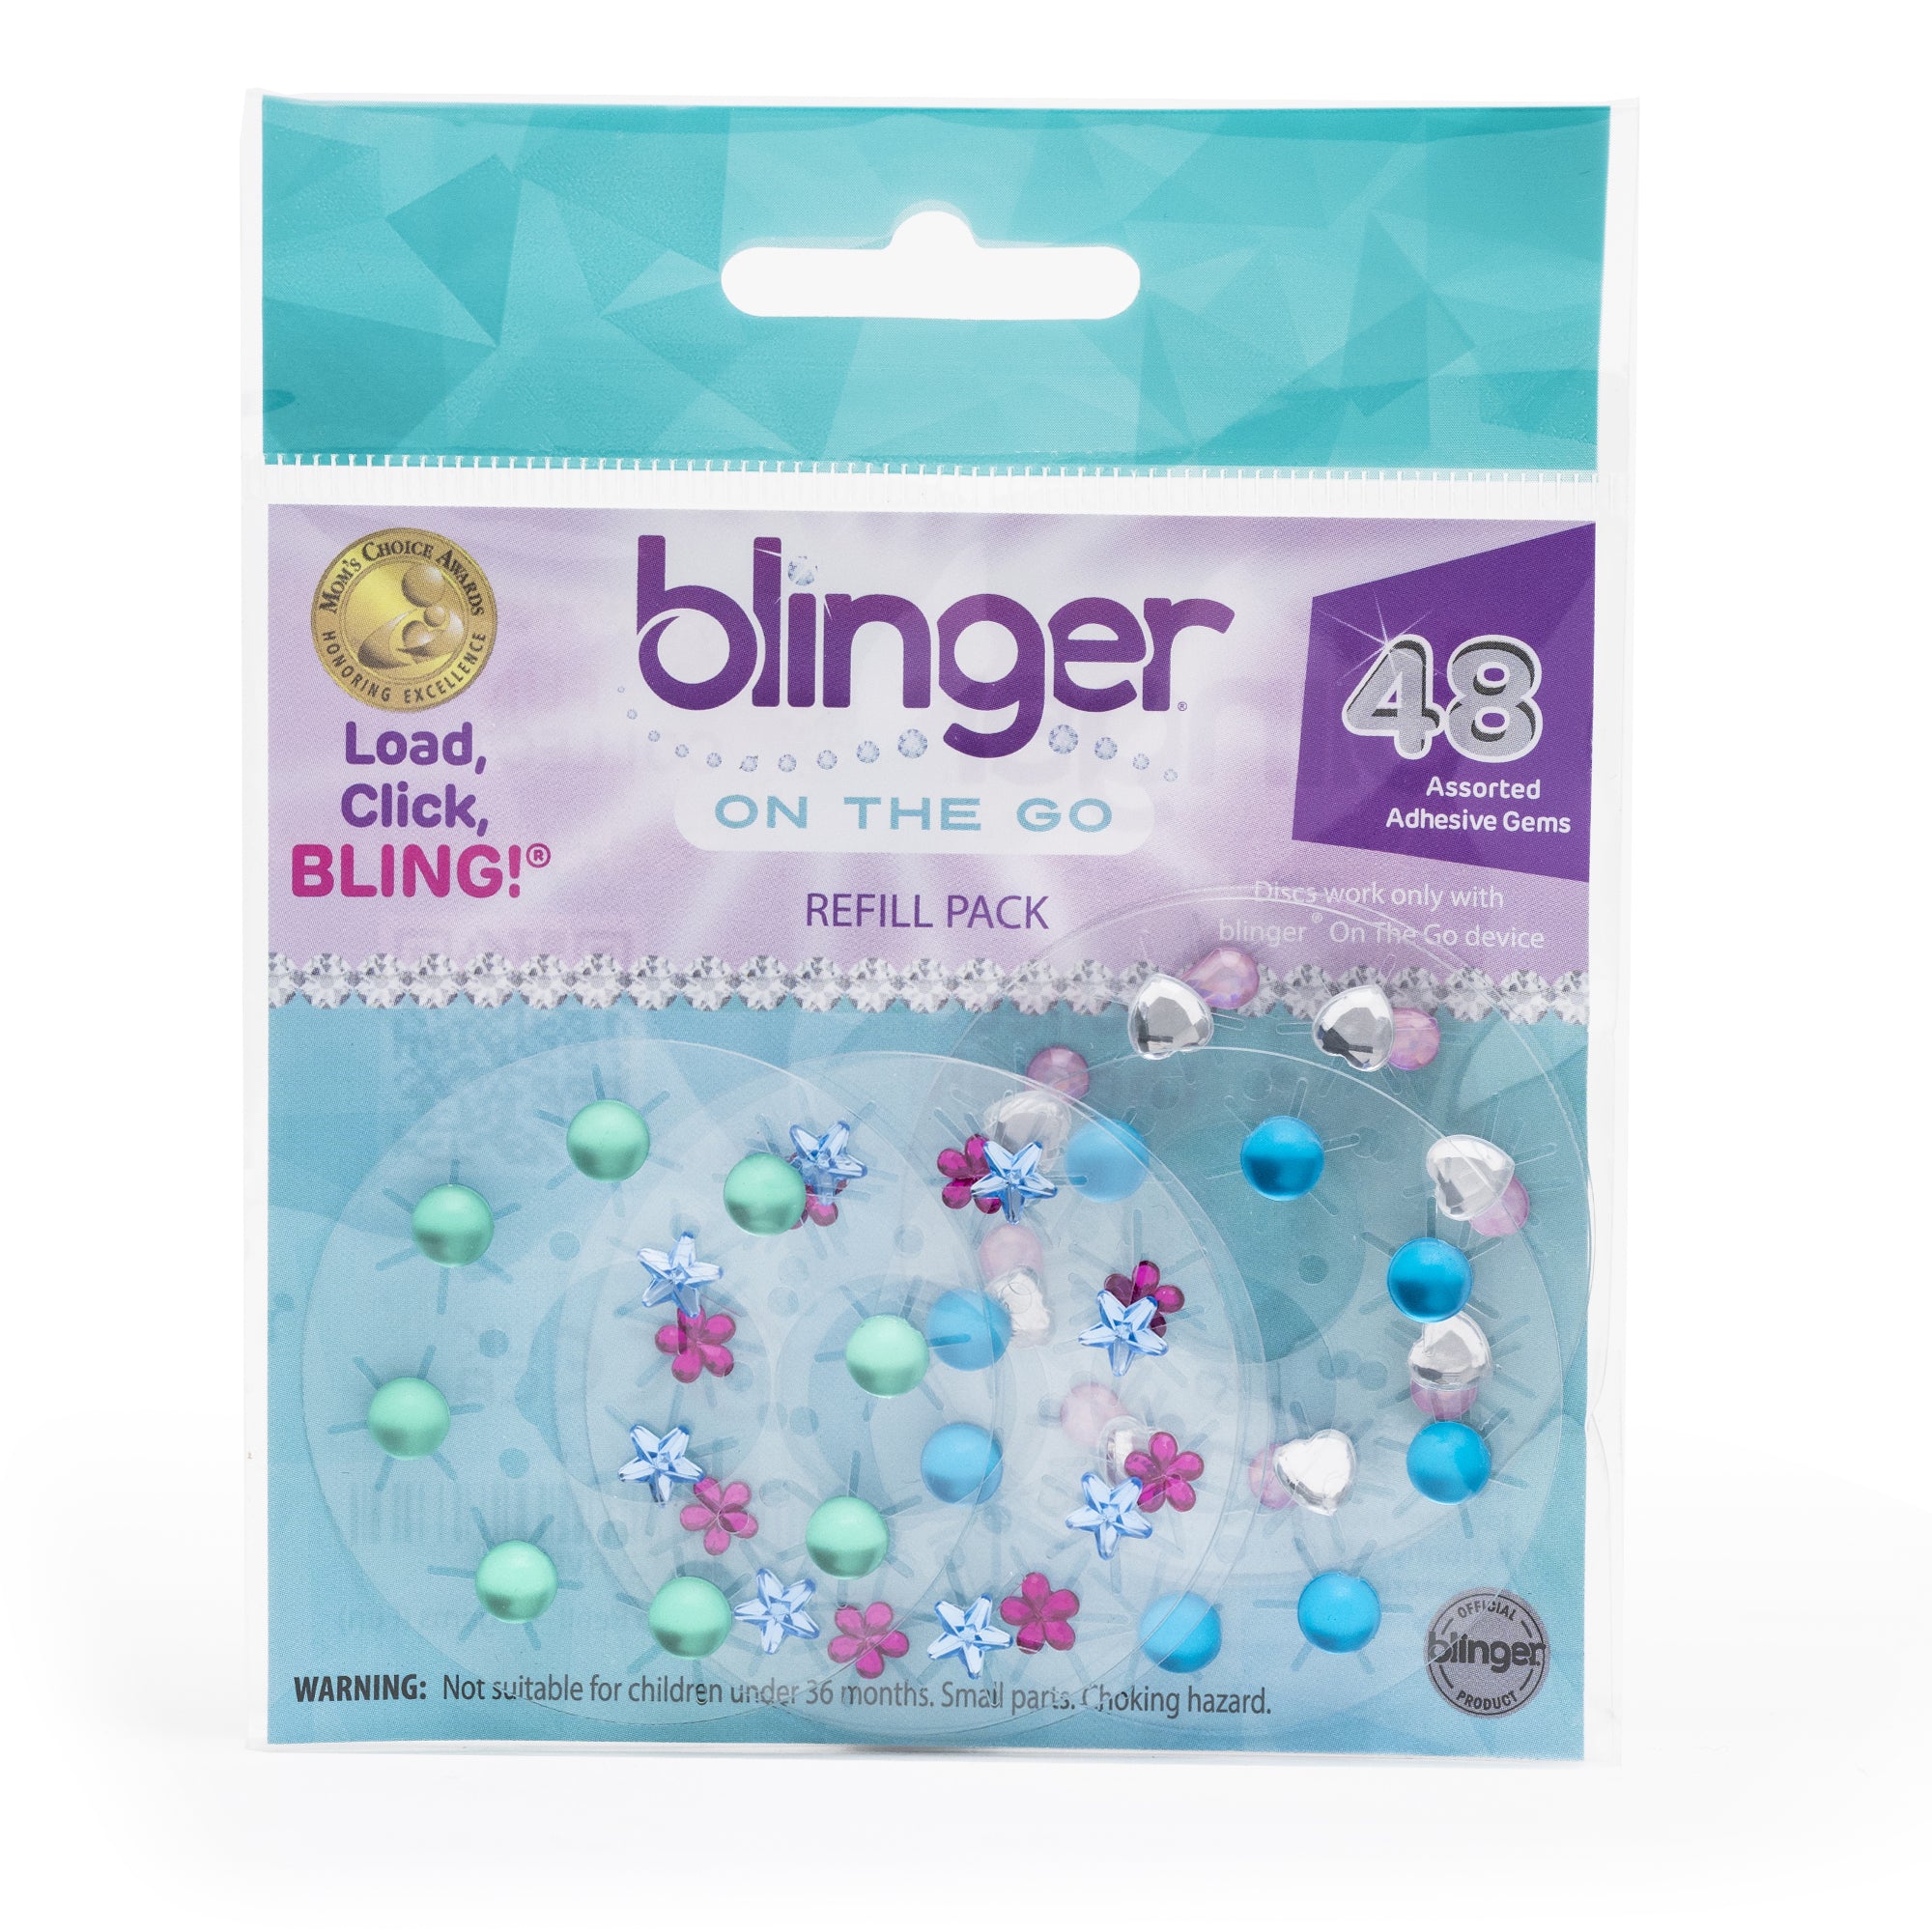 blinger® On The Go (Mini) Refill Pack with 48 Colorful Acrylic Rhinest